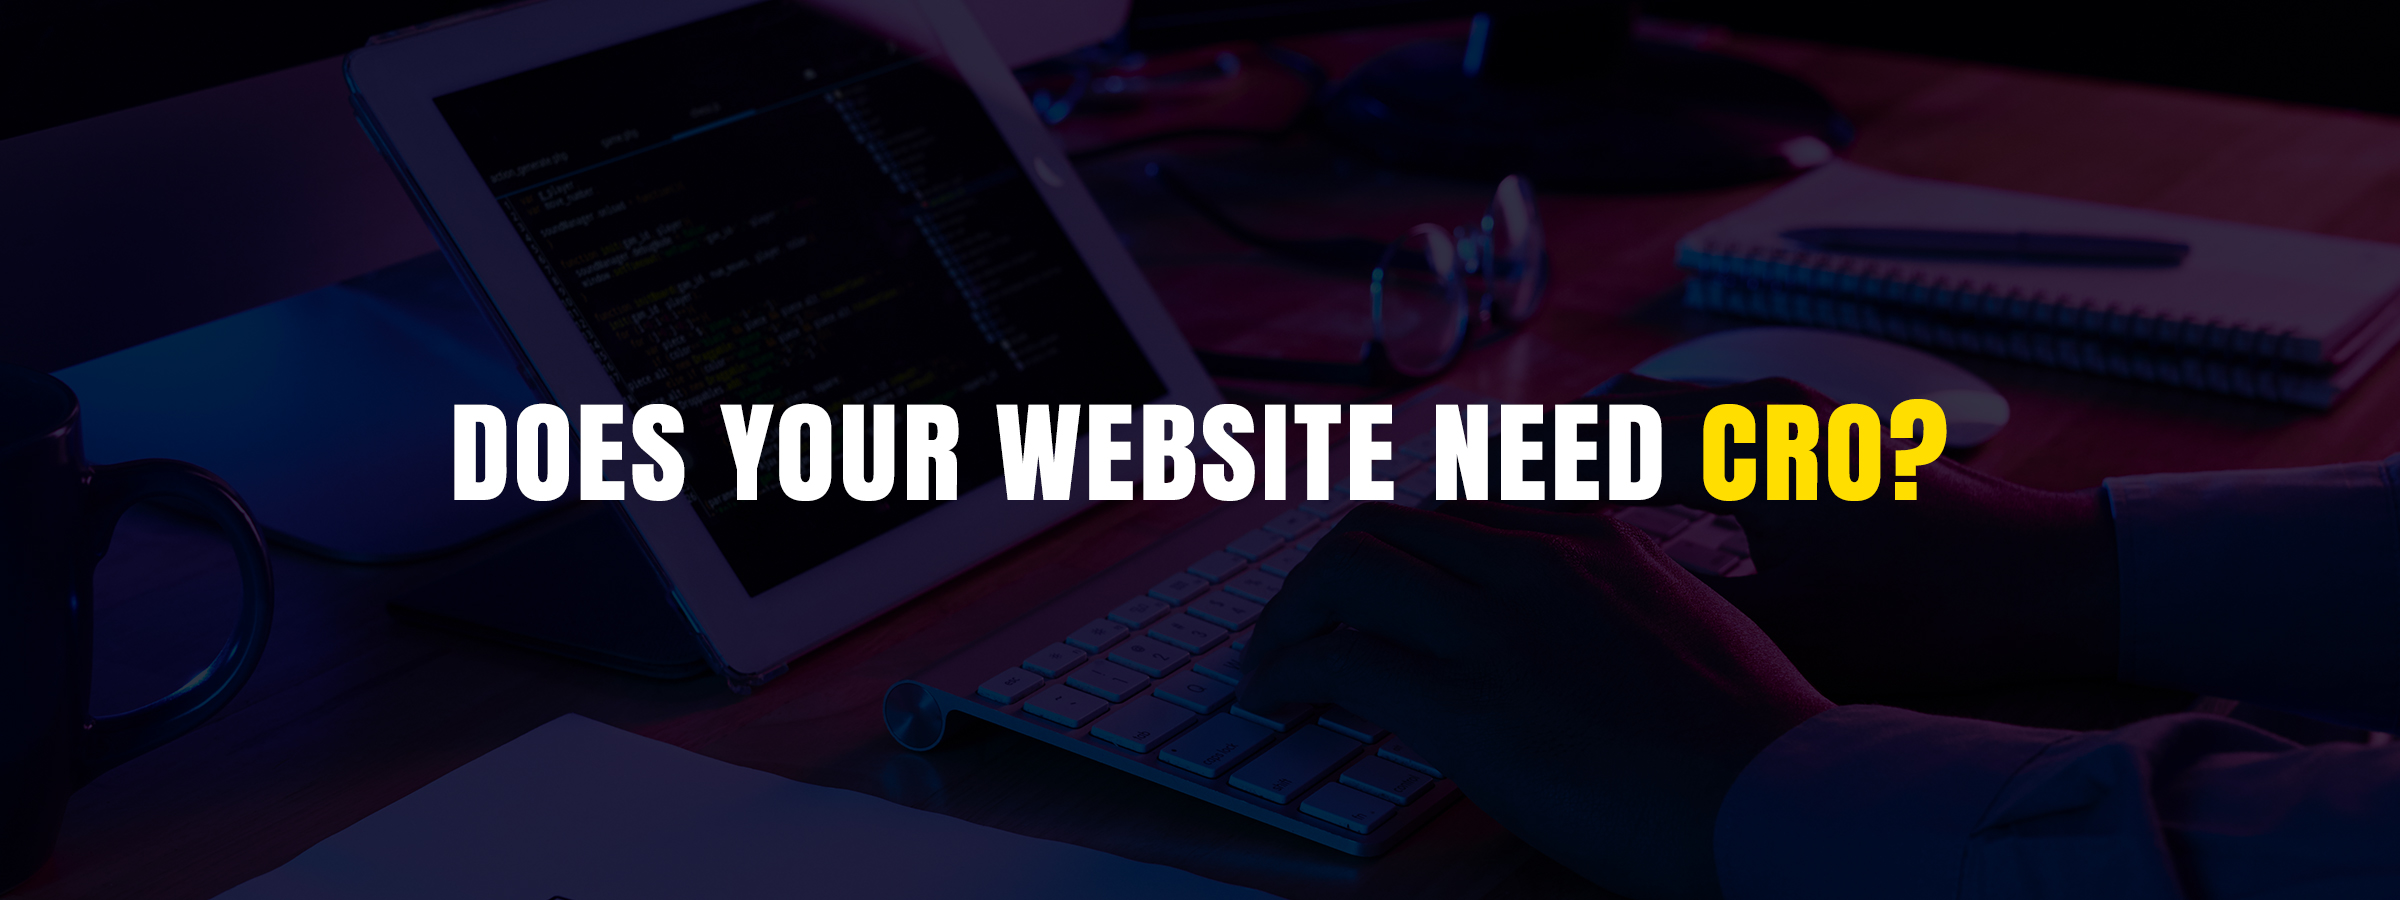 Does Your Website Need CRO?